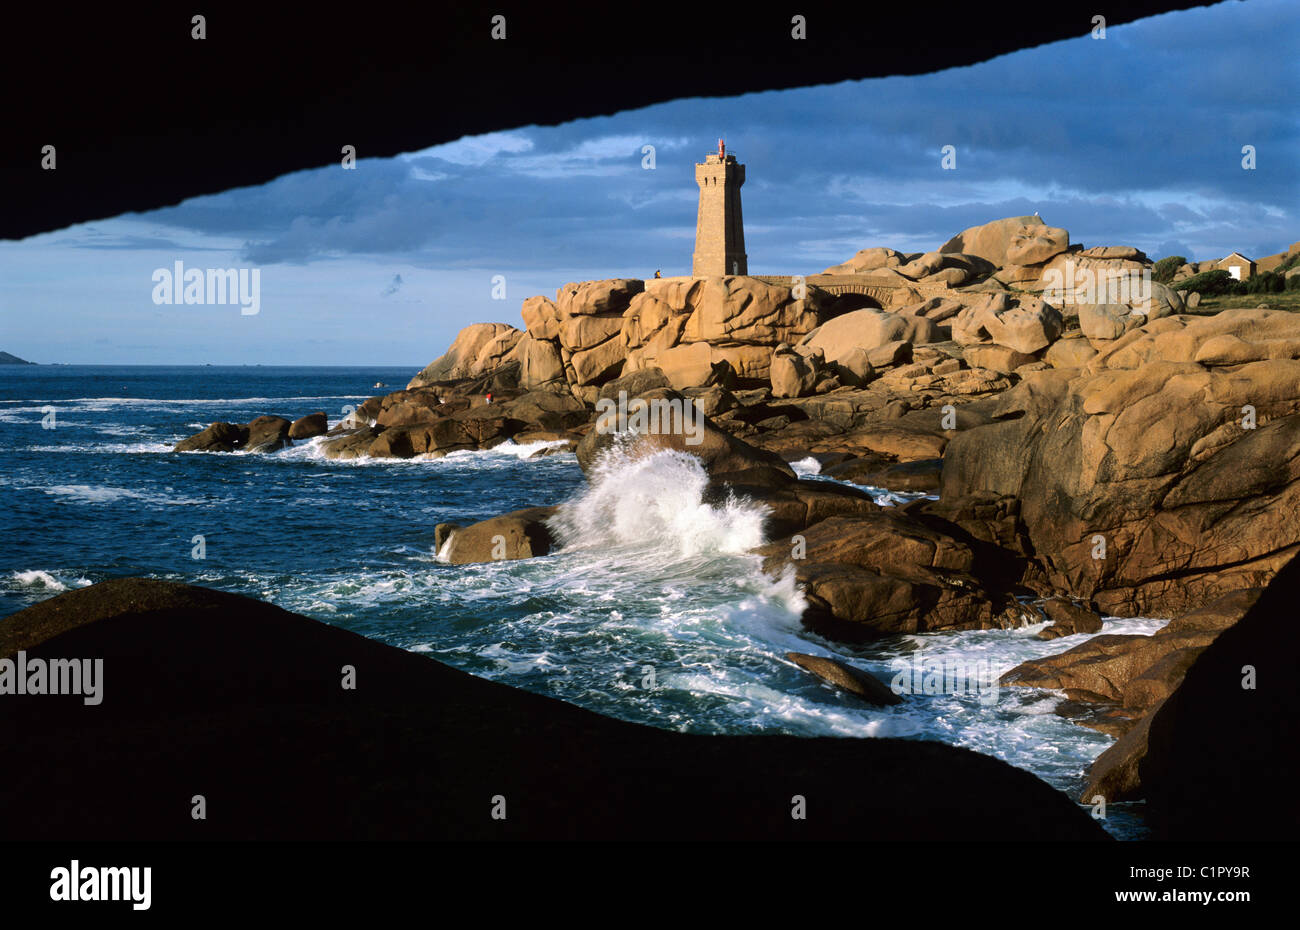 View through rocks to Lighthouse above stormy sea on the Pink Granite Coast. Stock Photo